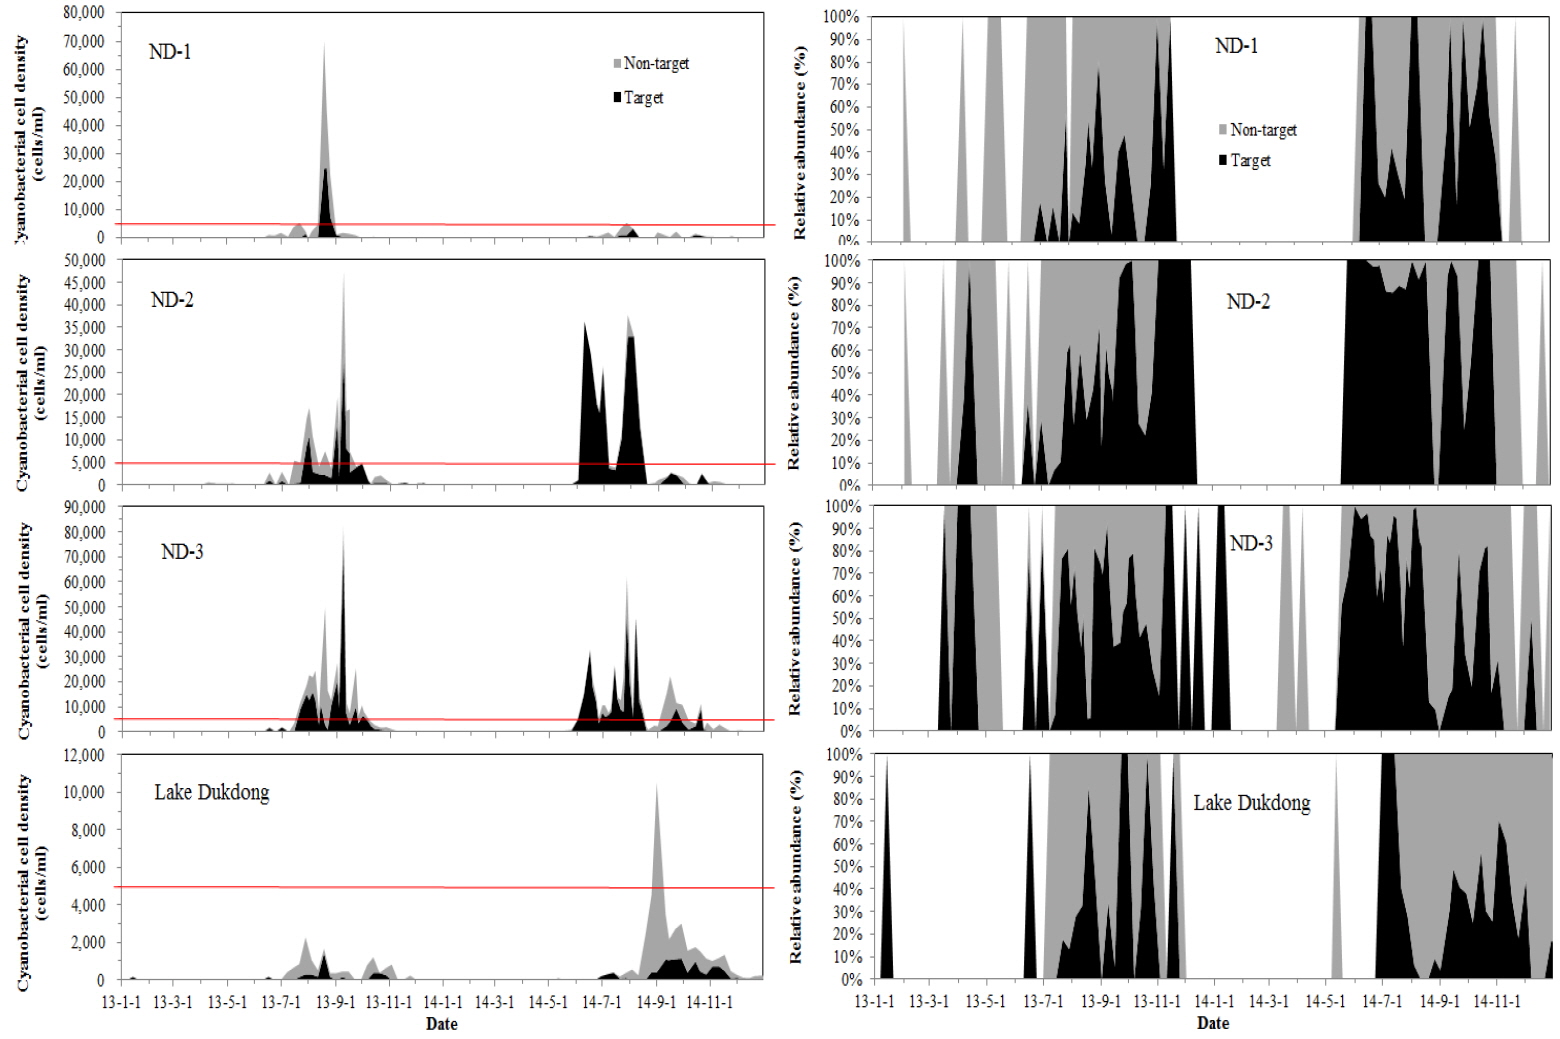 Temporal variations of cell density (a) and relative abundance (b) of target harmful cyanobacterial genera for HABAS (black) and non-target cyanobacterial genera (grey) at the survey stations from 2013 to 2014.